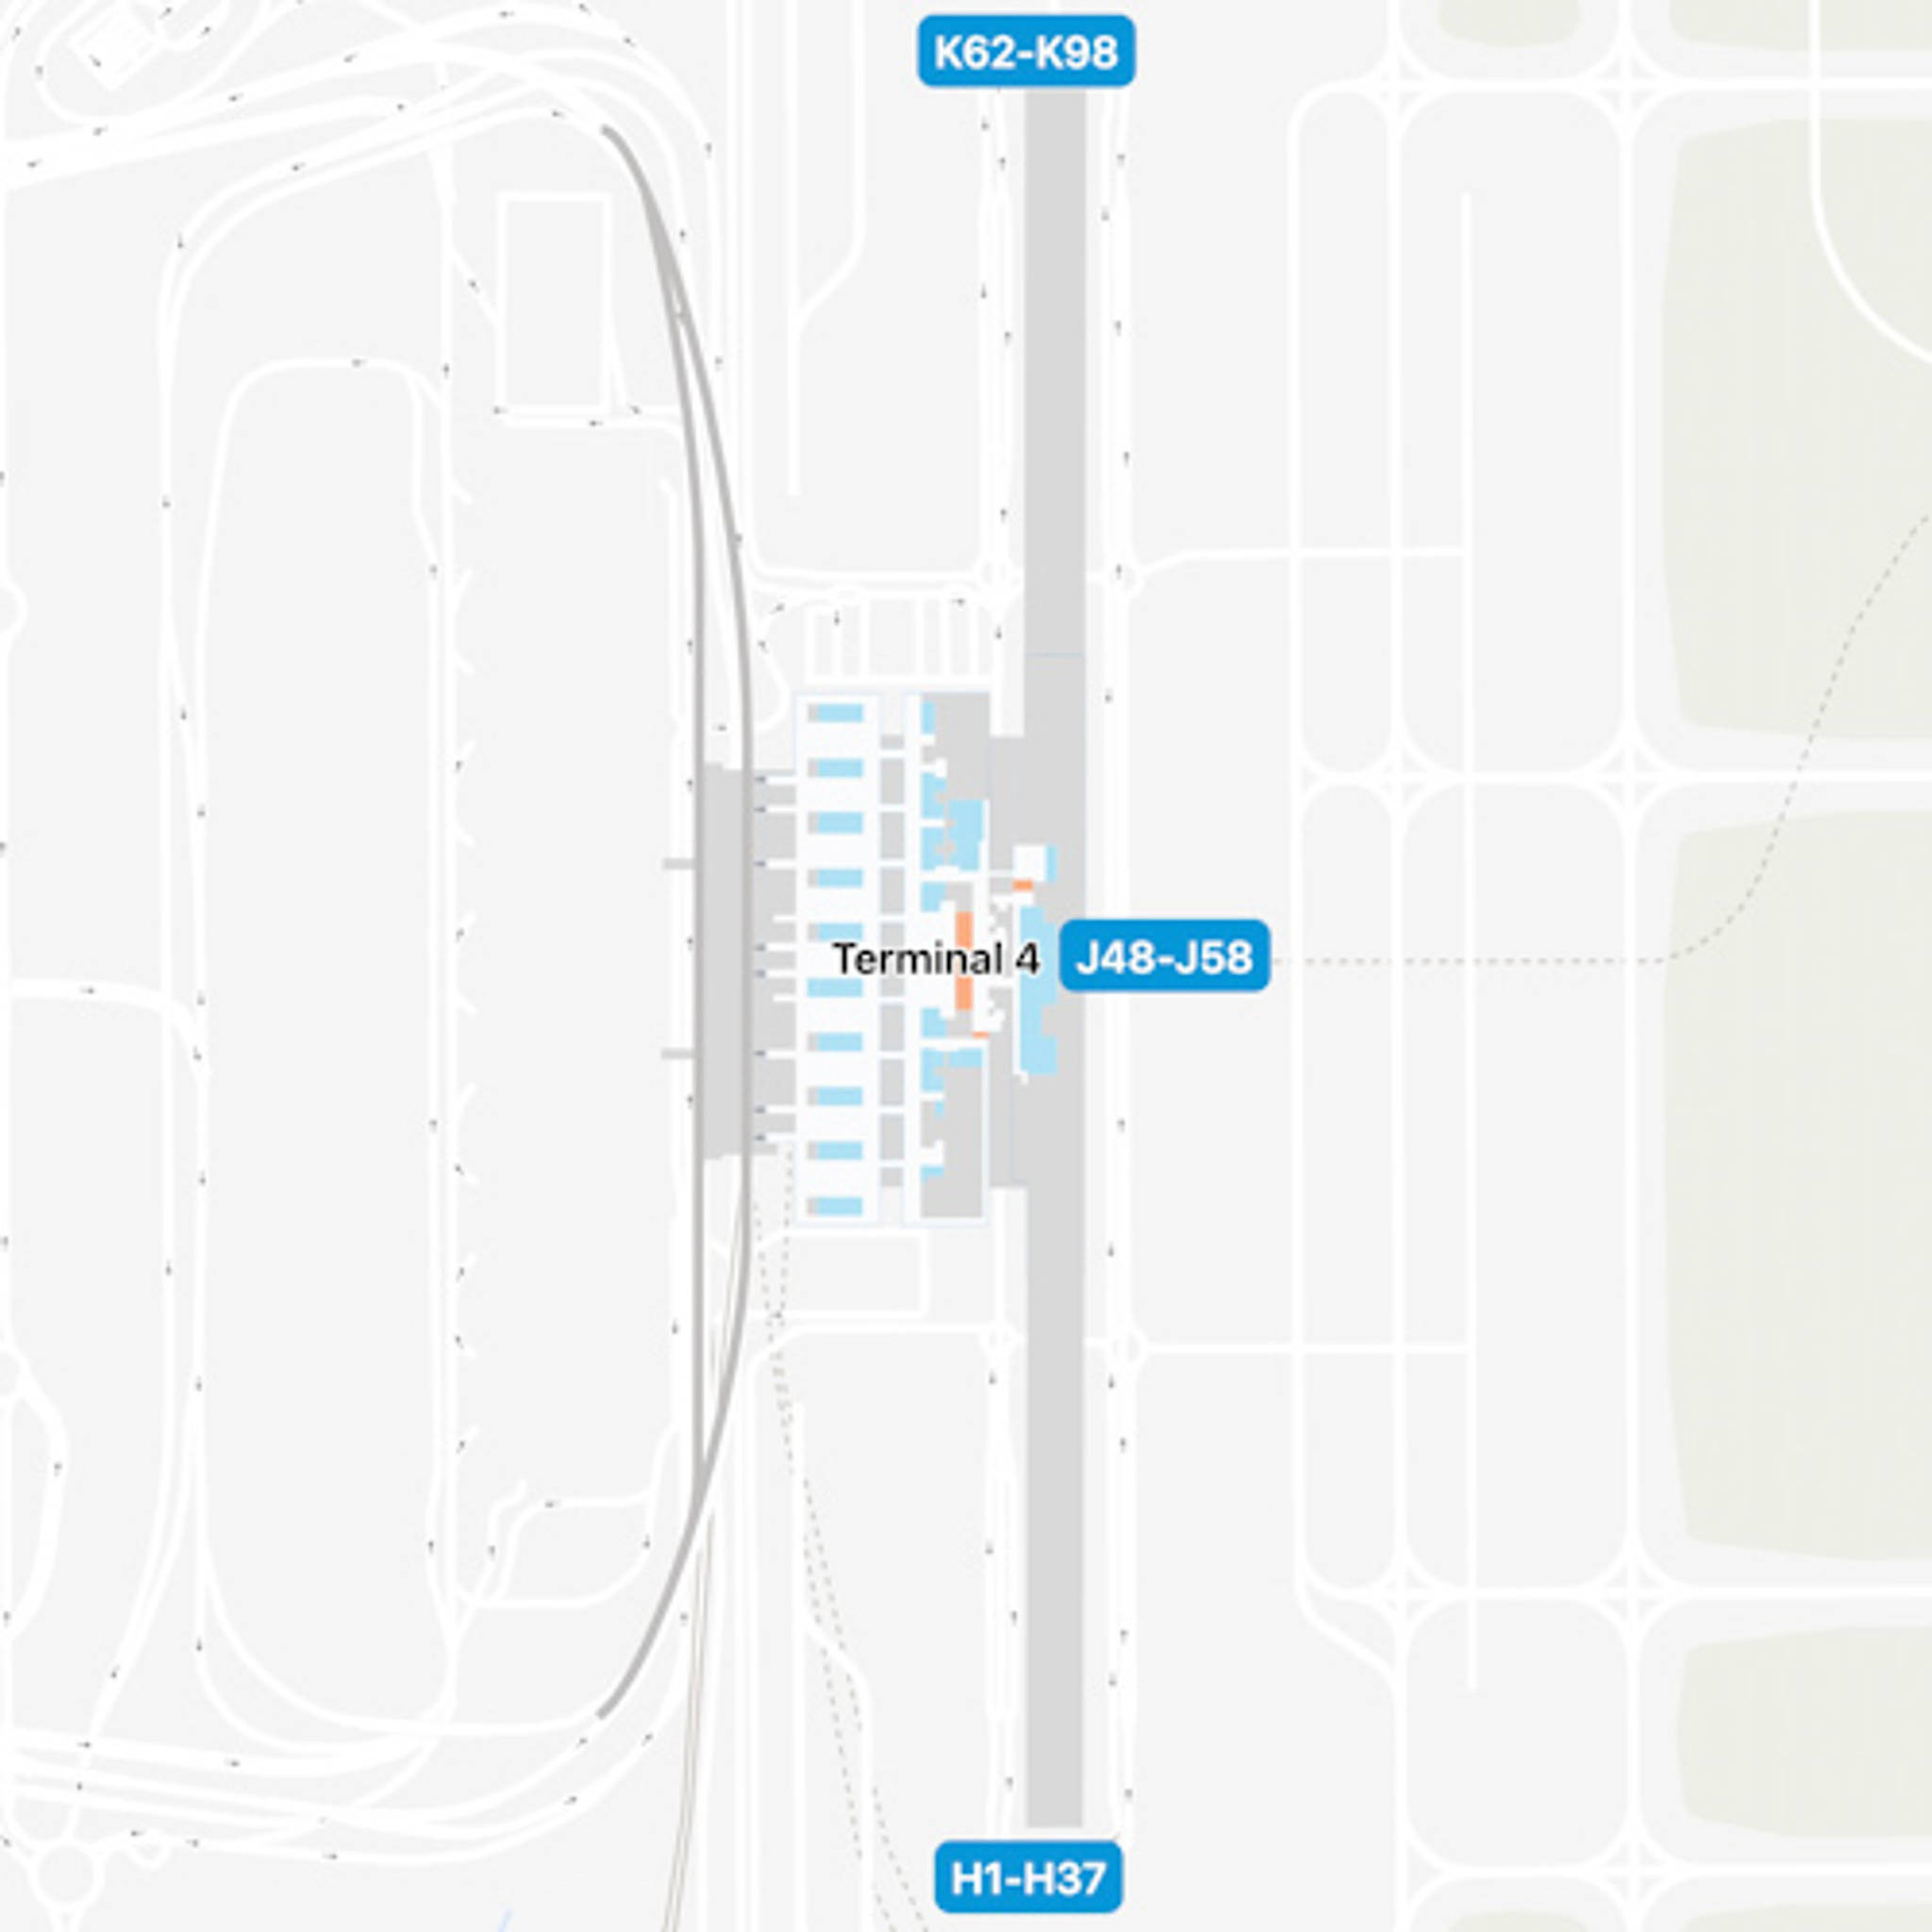 Madrid Airport Map Guide to MAD's Terminals